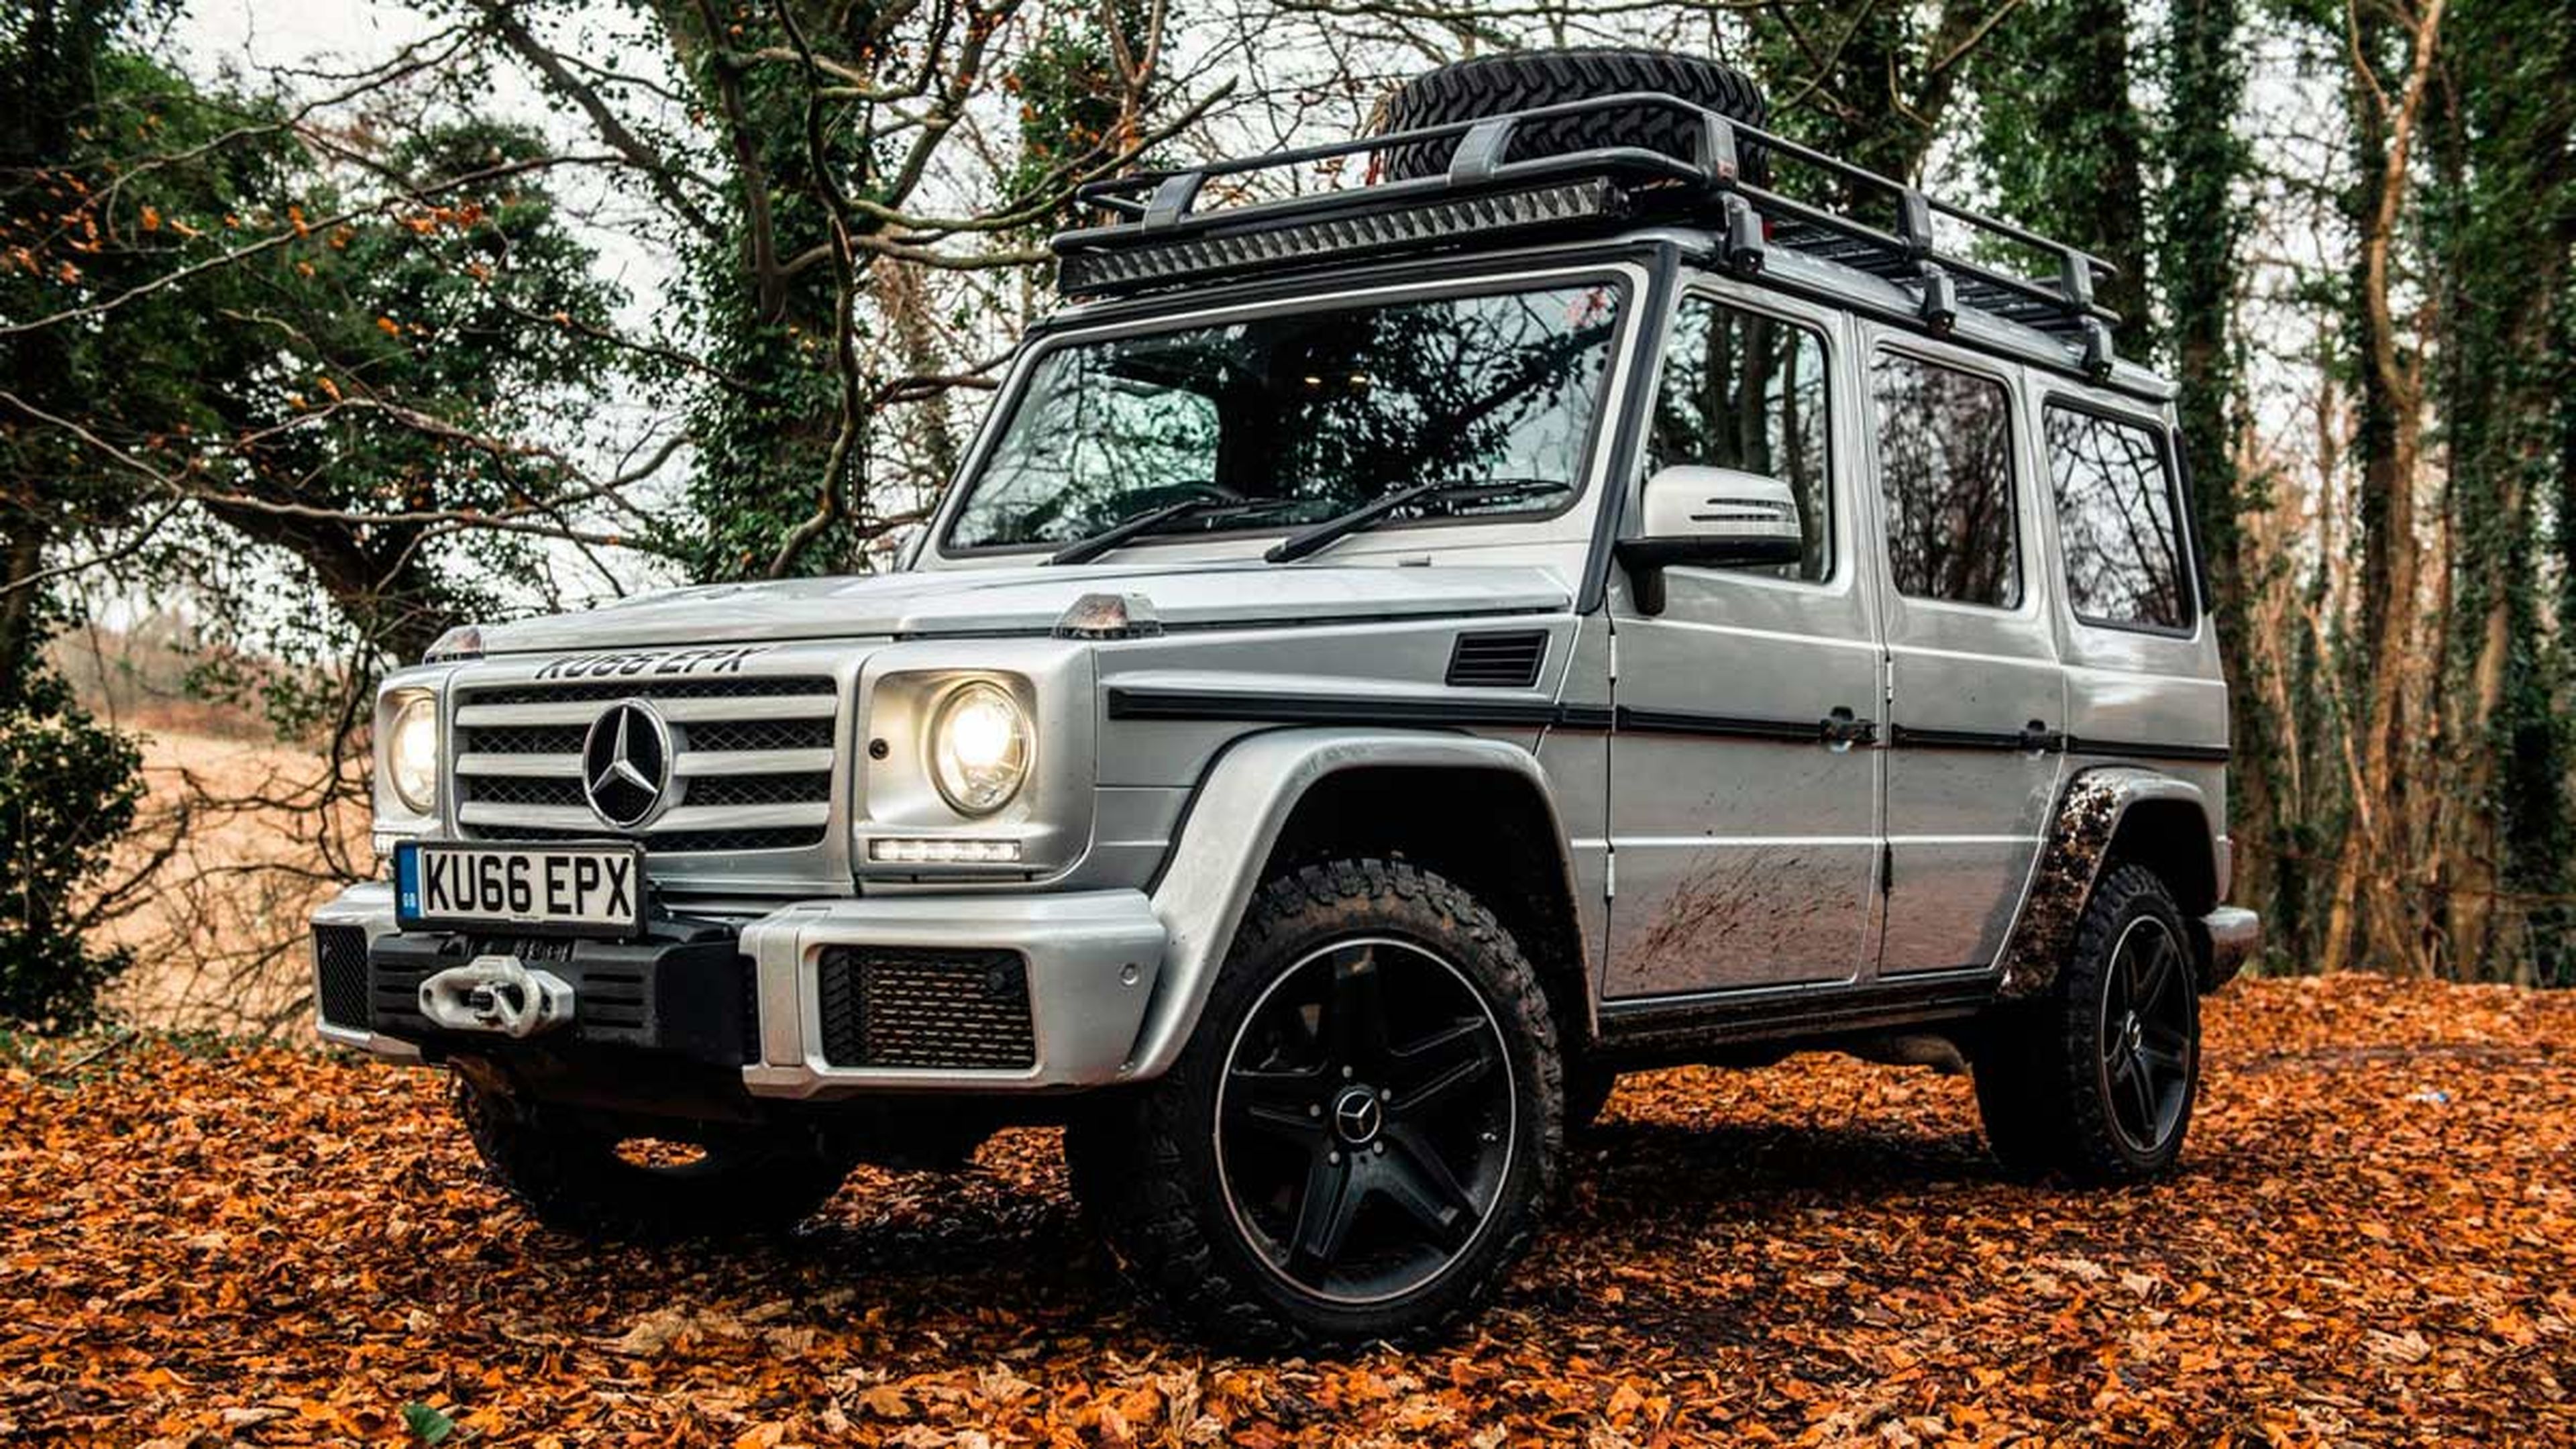 Mercedes Clase G off-road